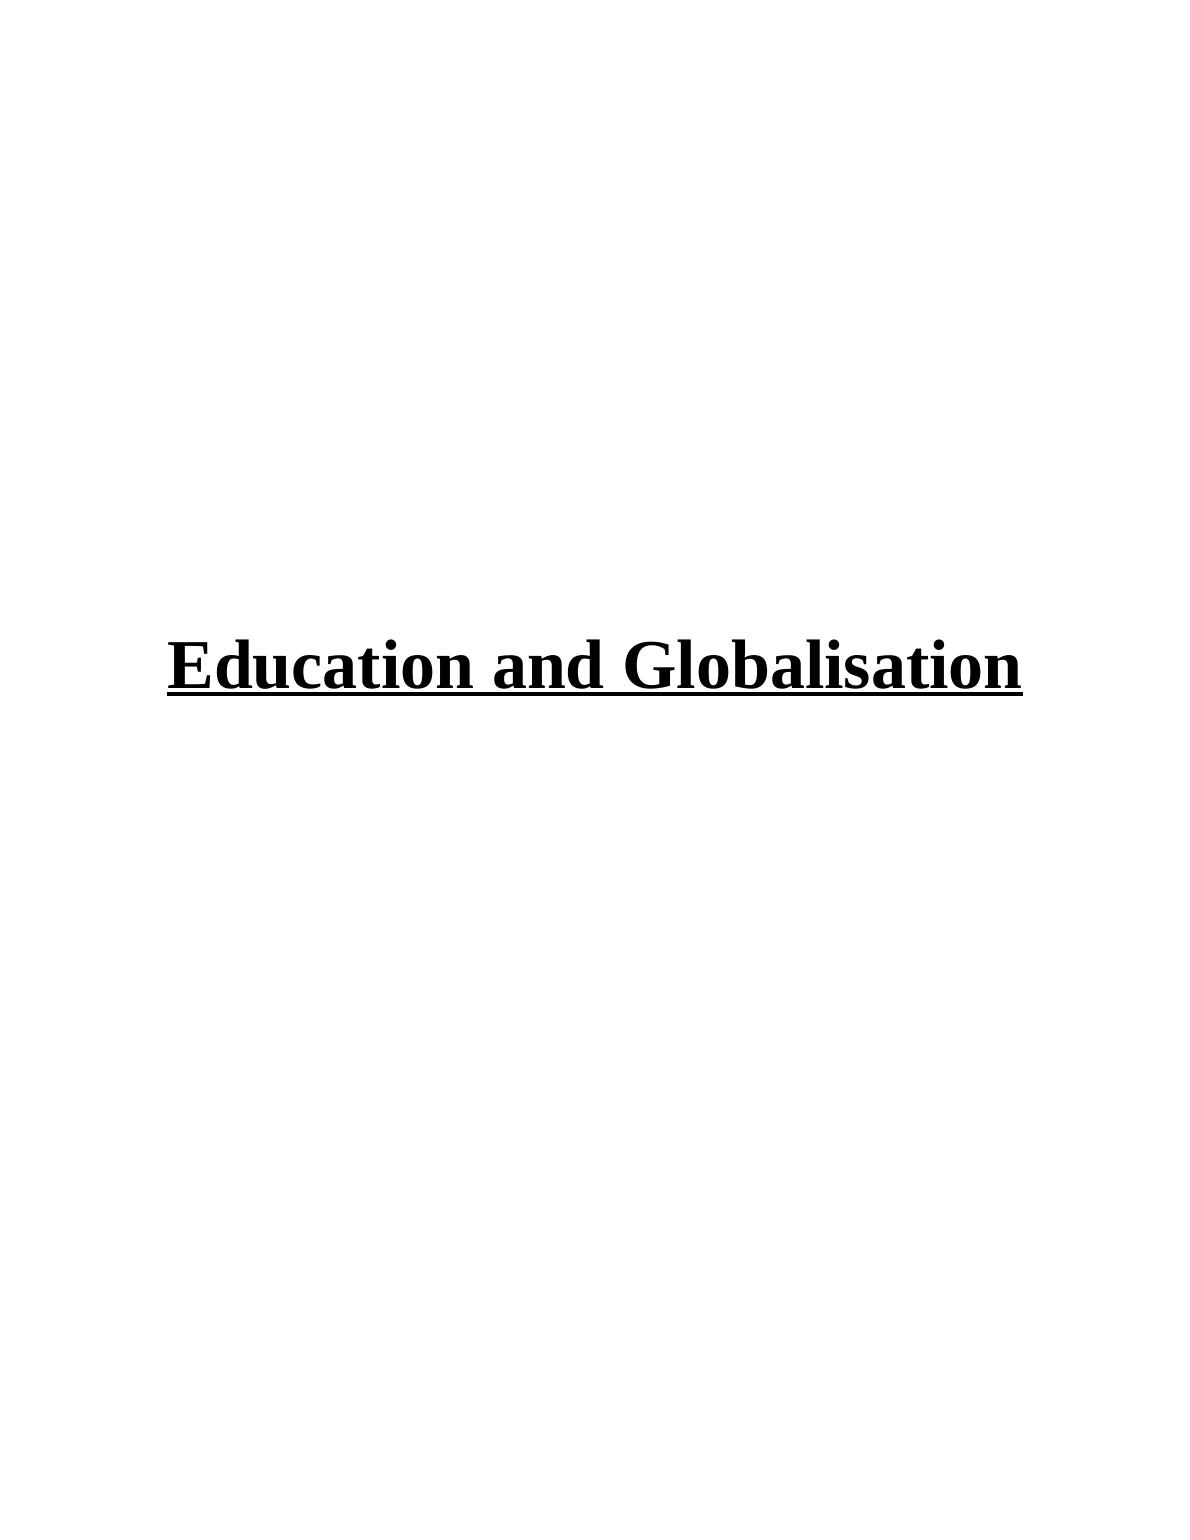 Education and Globalisation_1